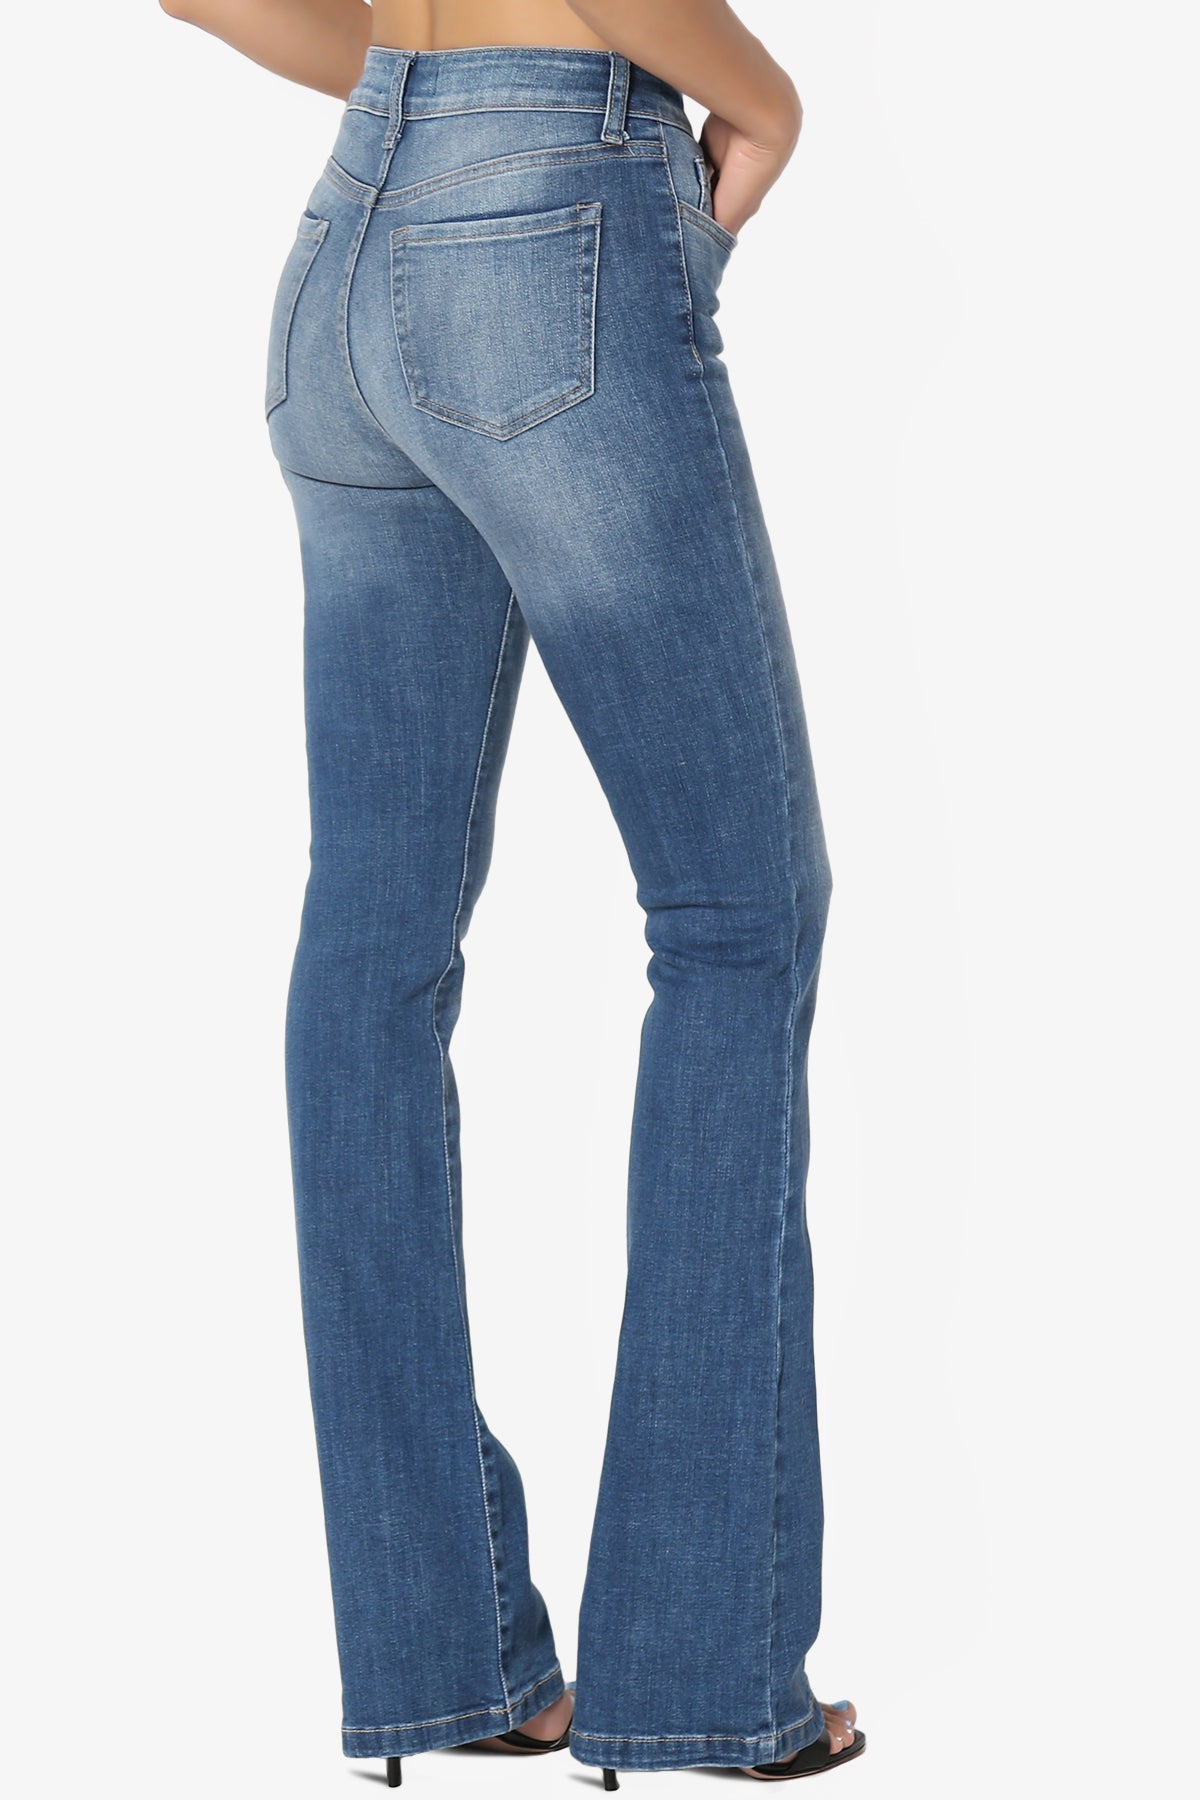 Clyde Washed Mid Rise Boot Cut Jeans in Dark